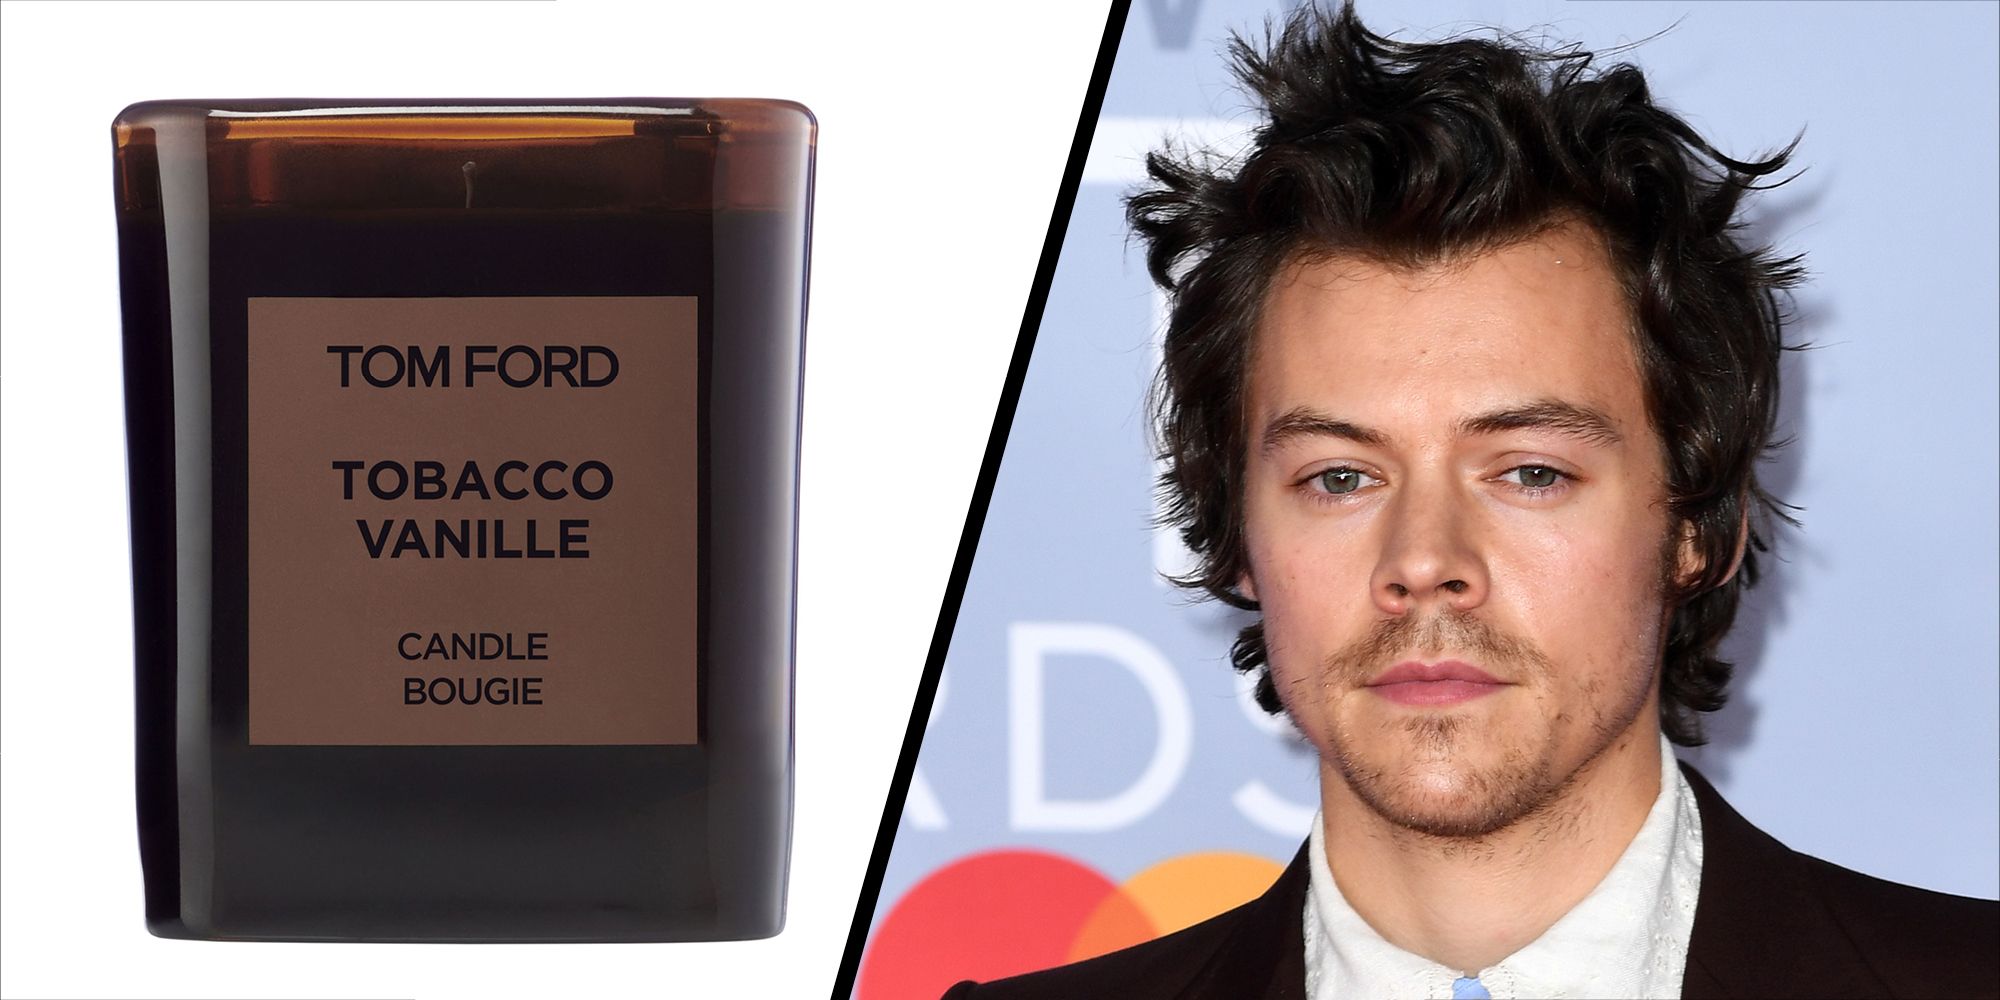 This Tom Ford candle is selling out thanks to Harry Styles